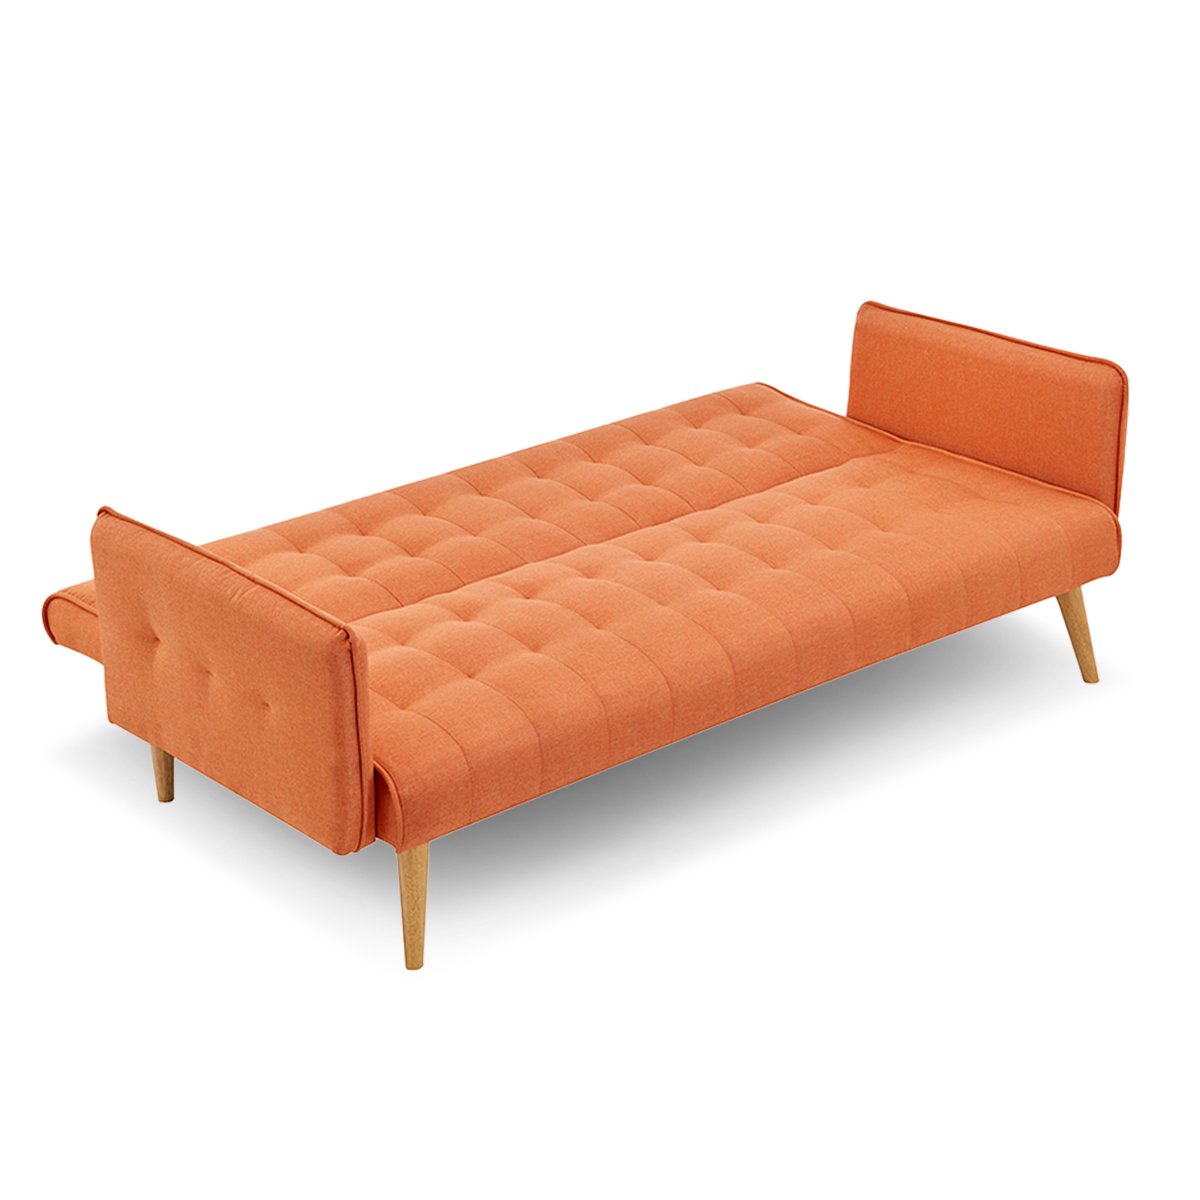 3 Seater Modular Linen Fabric Sofa Bed Couch Armrest Orange